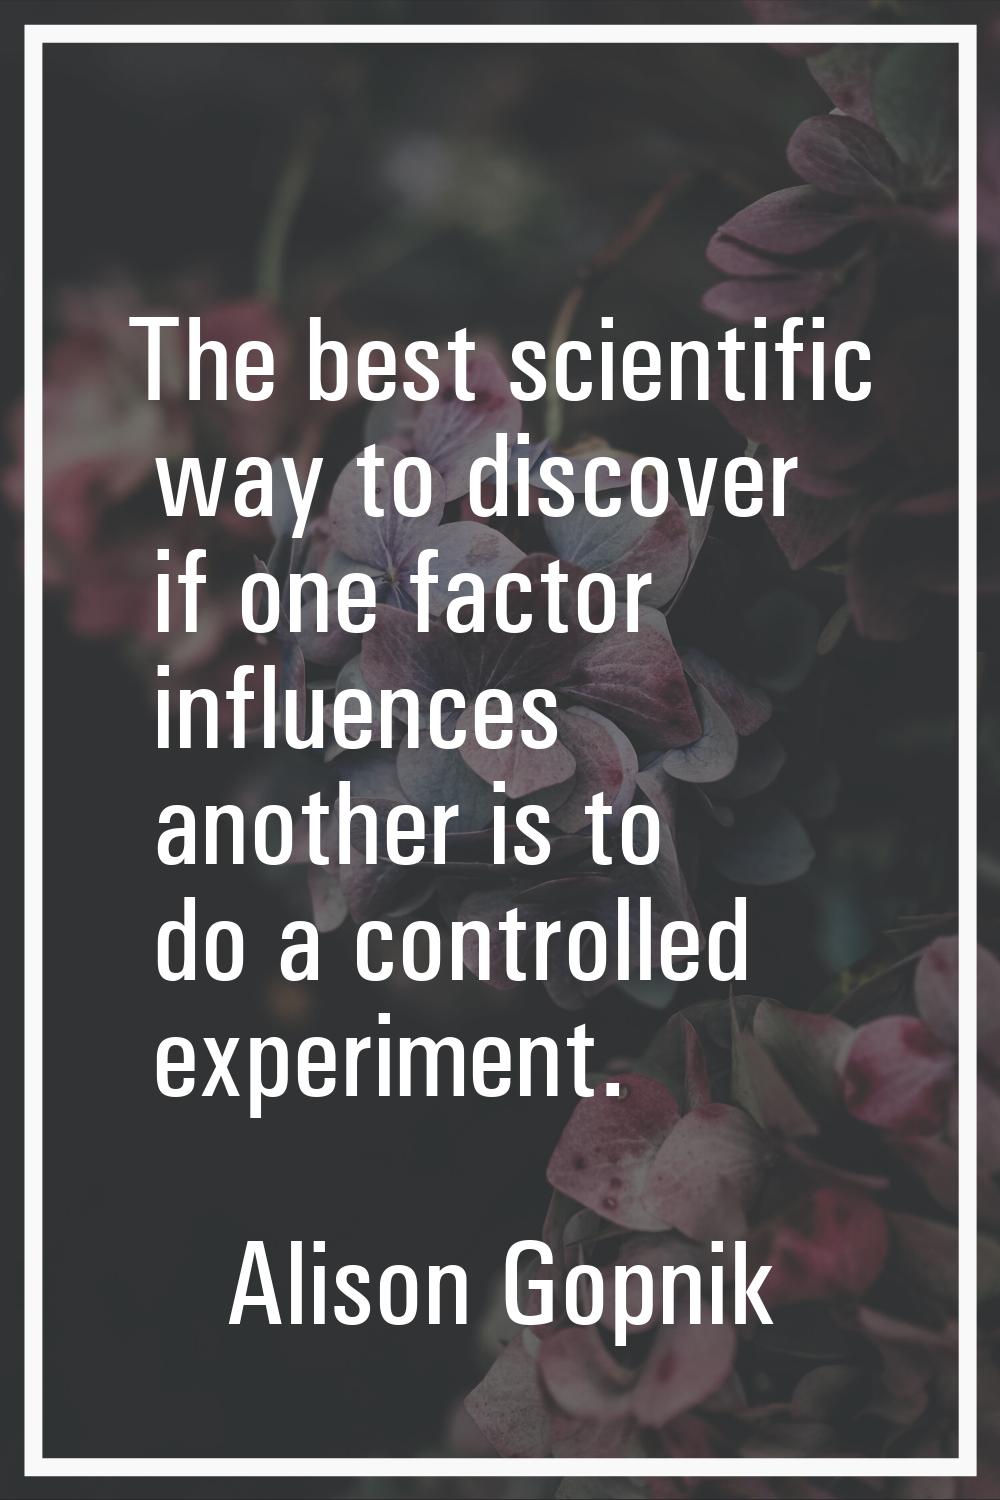 The best scientific way to discover if one factor influences another is to do a controlled experime